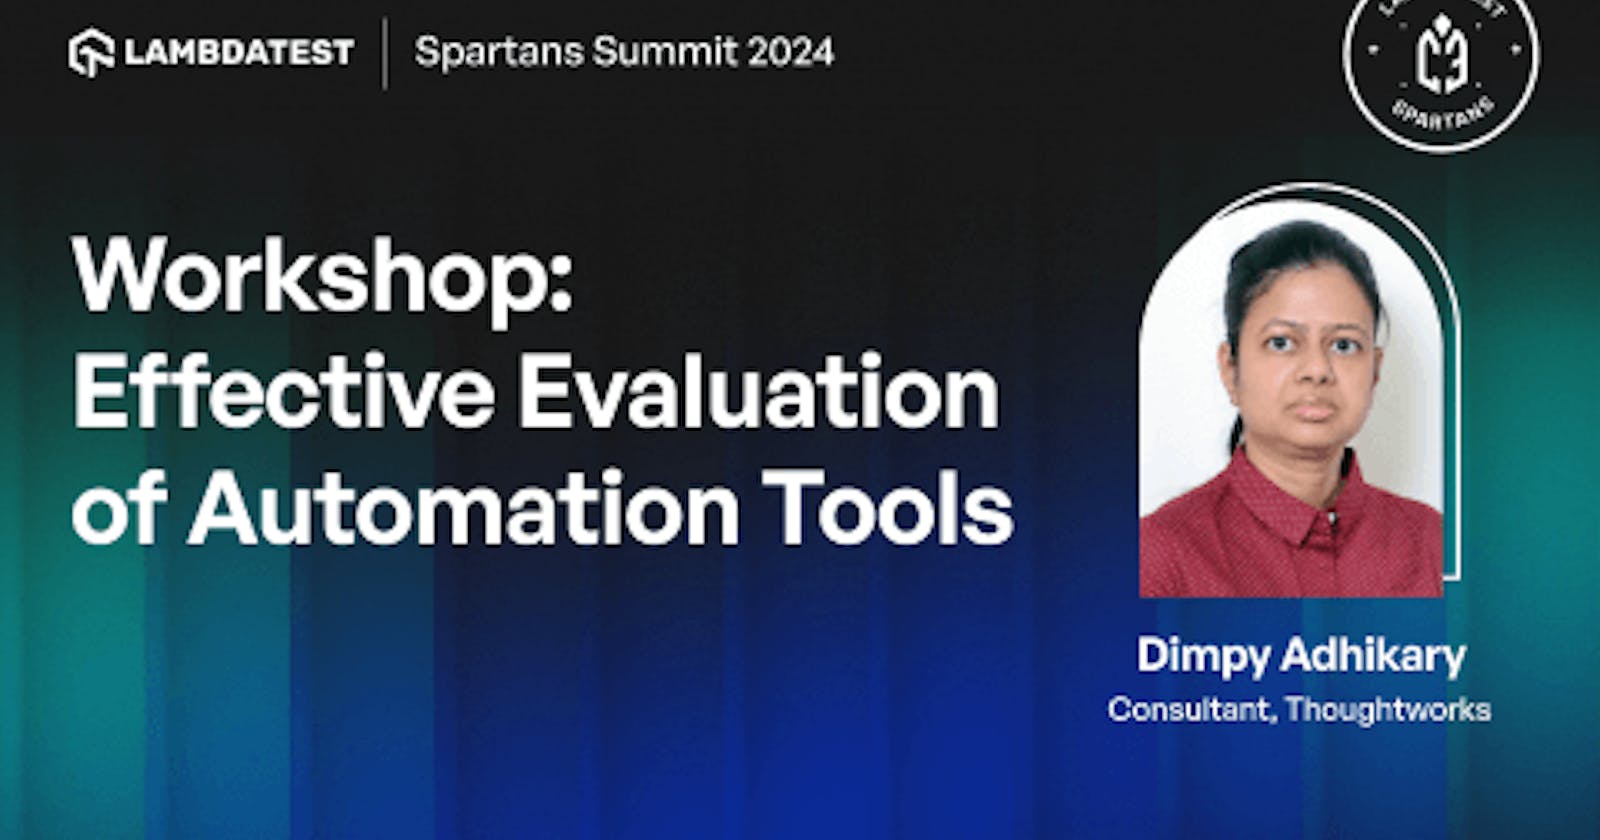 Workshop: Effective Evaluation of Automation Tools [Spartans Summit 2024]